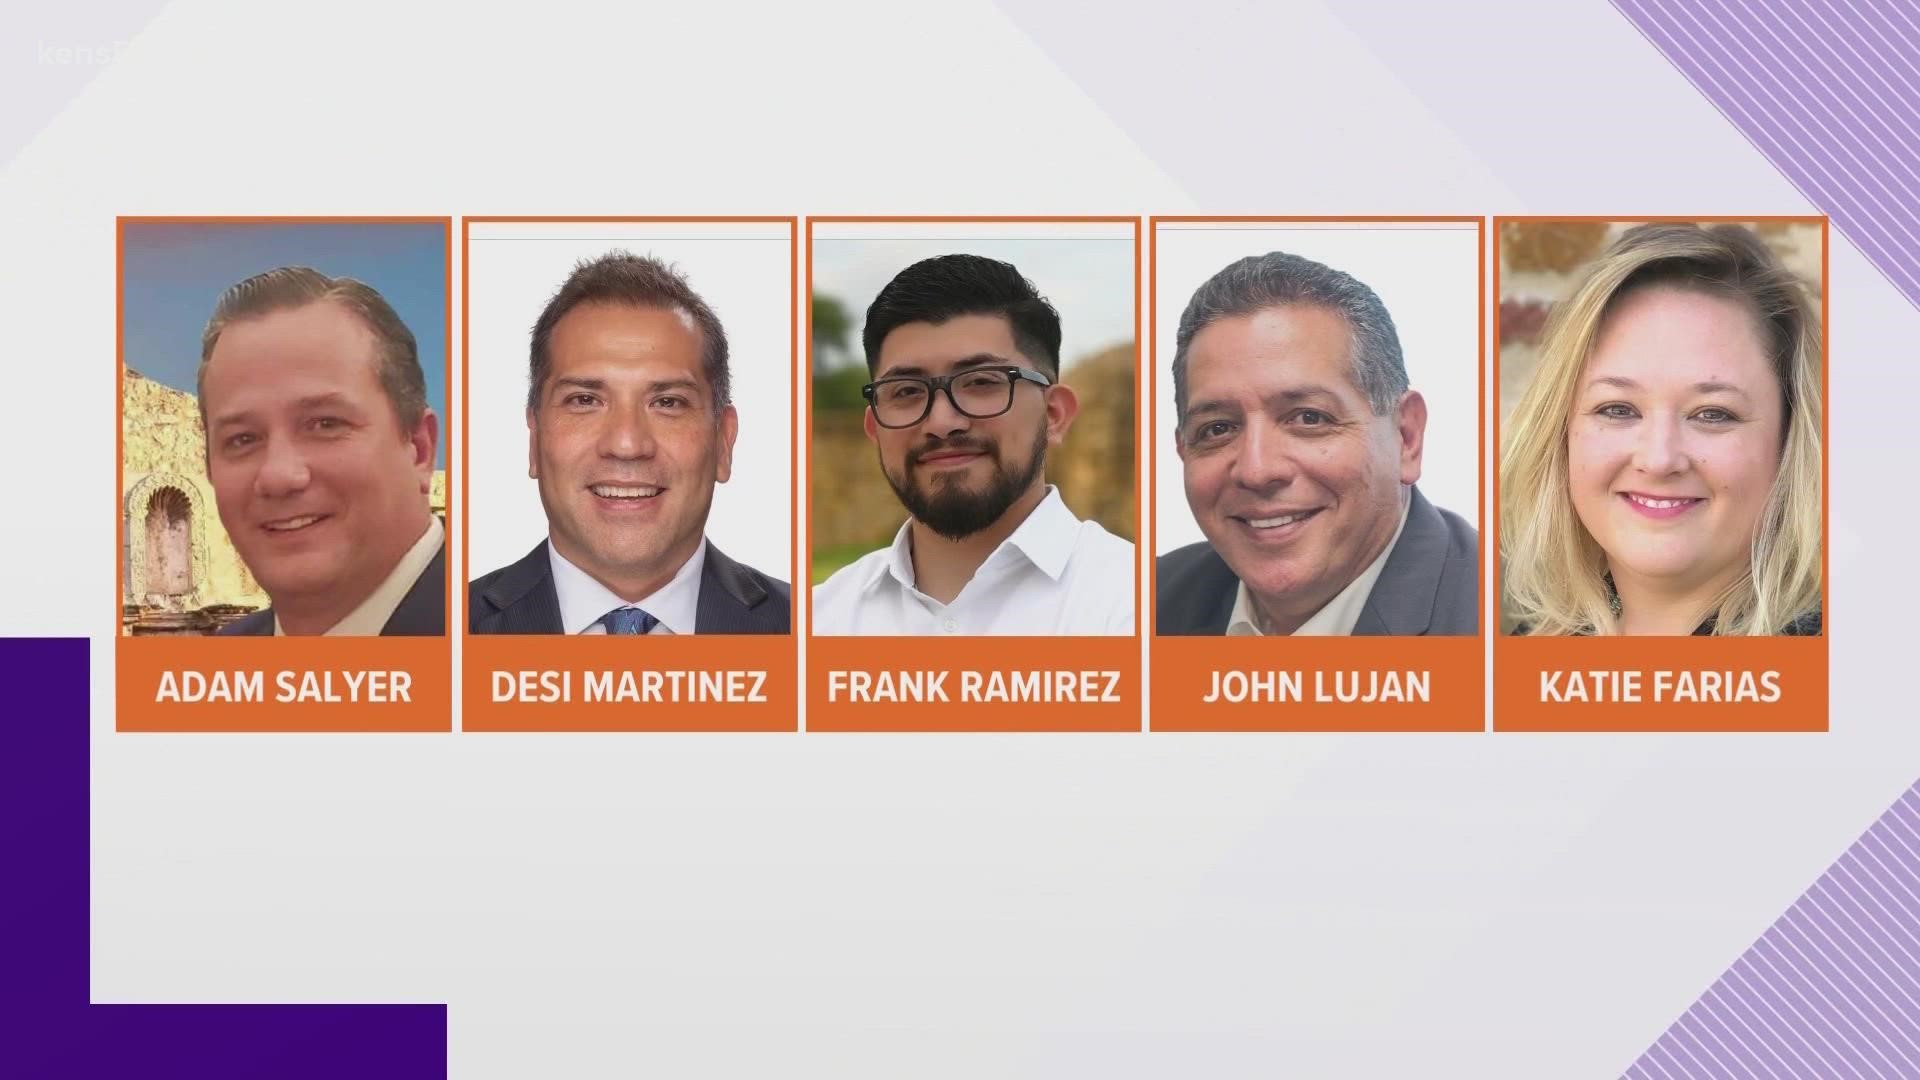 A special election fielding five candidates, three Democrats and two Republicans, will be held to fill Leo Pacheco's seat.